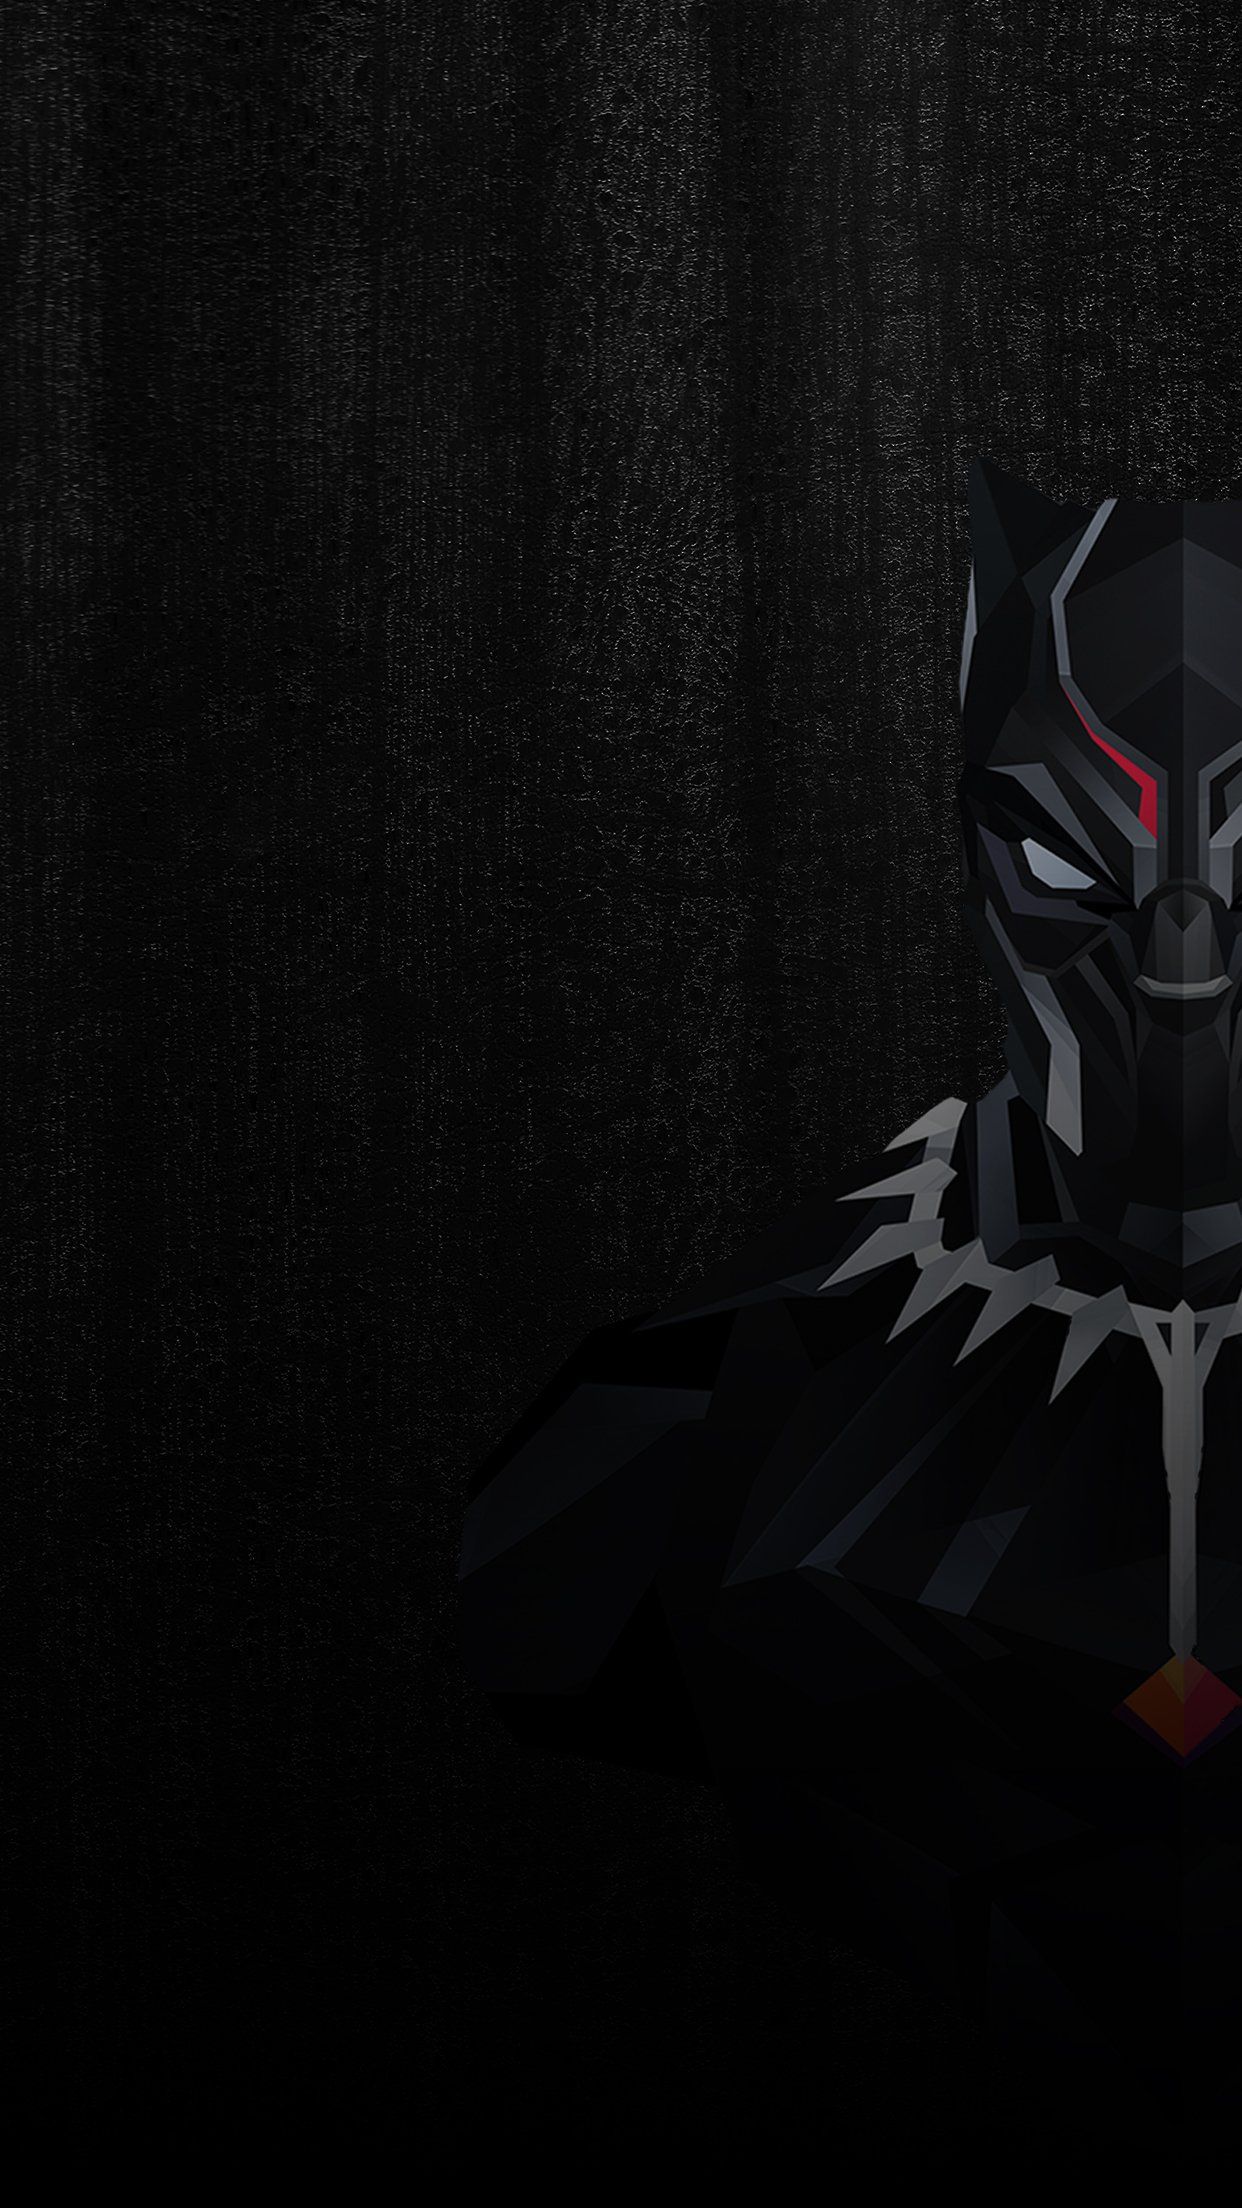 Black Panther HD Wallpaper For Mobile